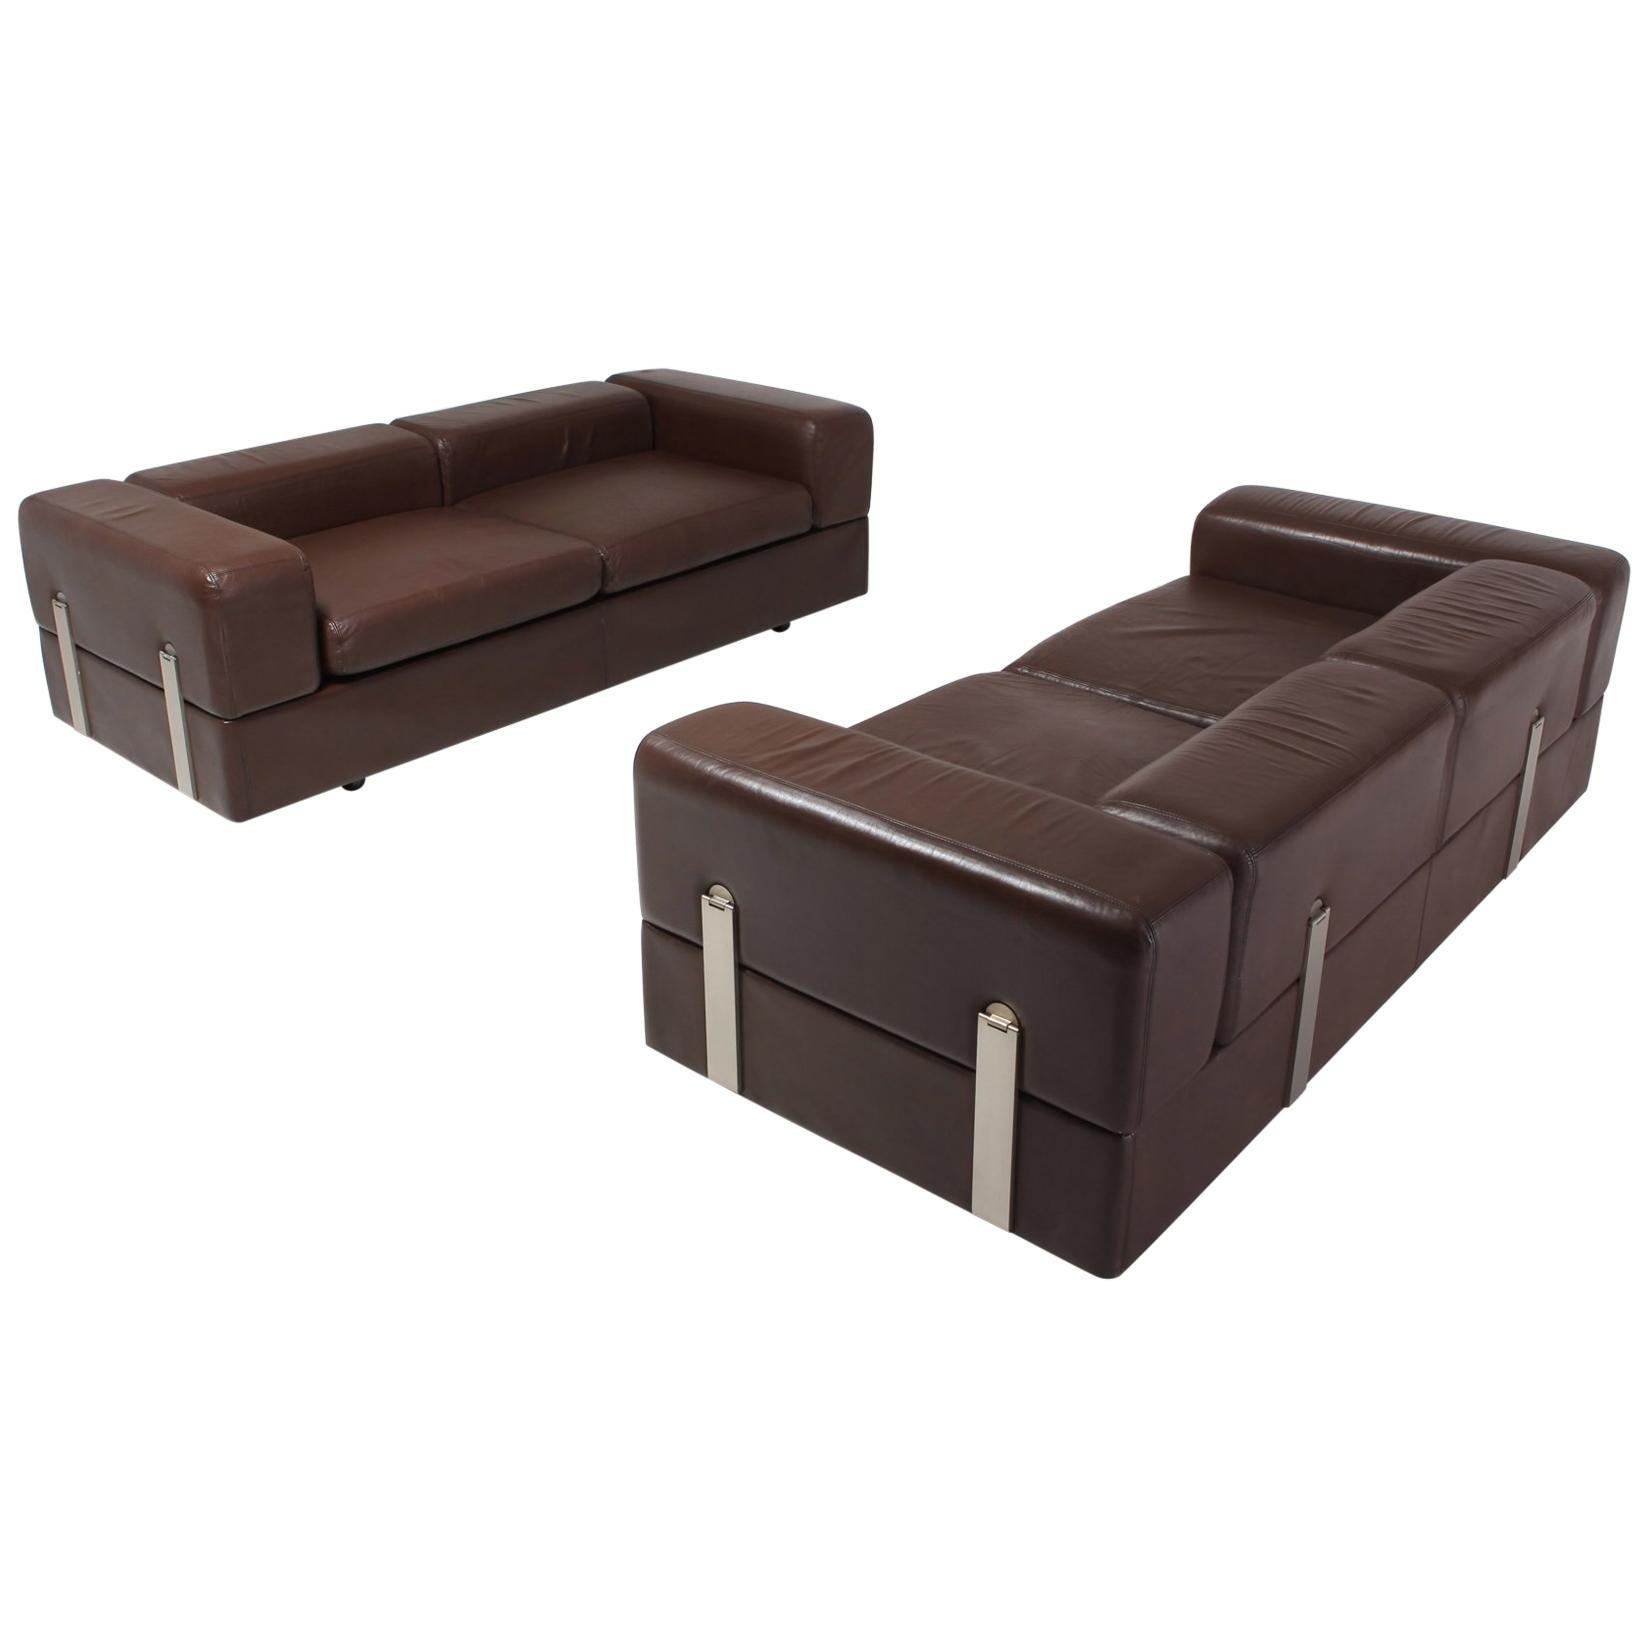 Daybed Sofa Set of 2 711 by Tito Agnoli for Cinova in Brown Leather